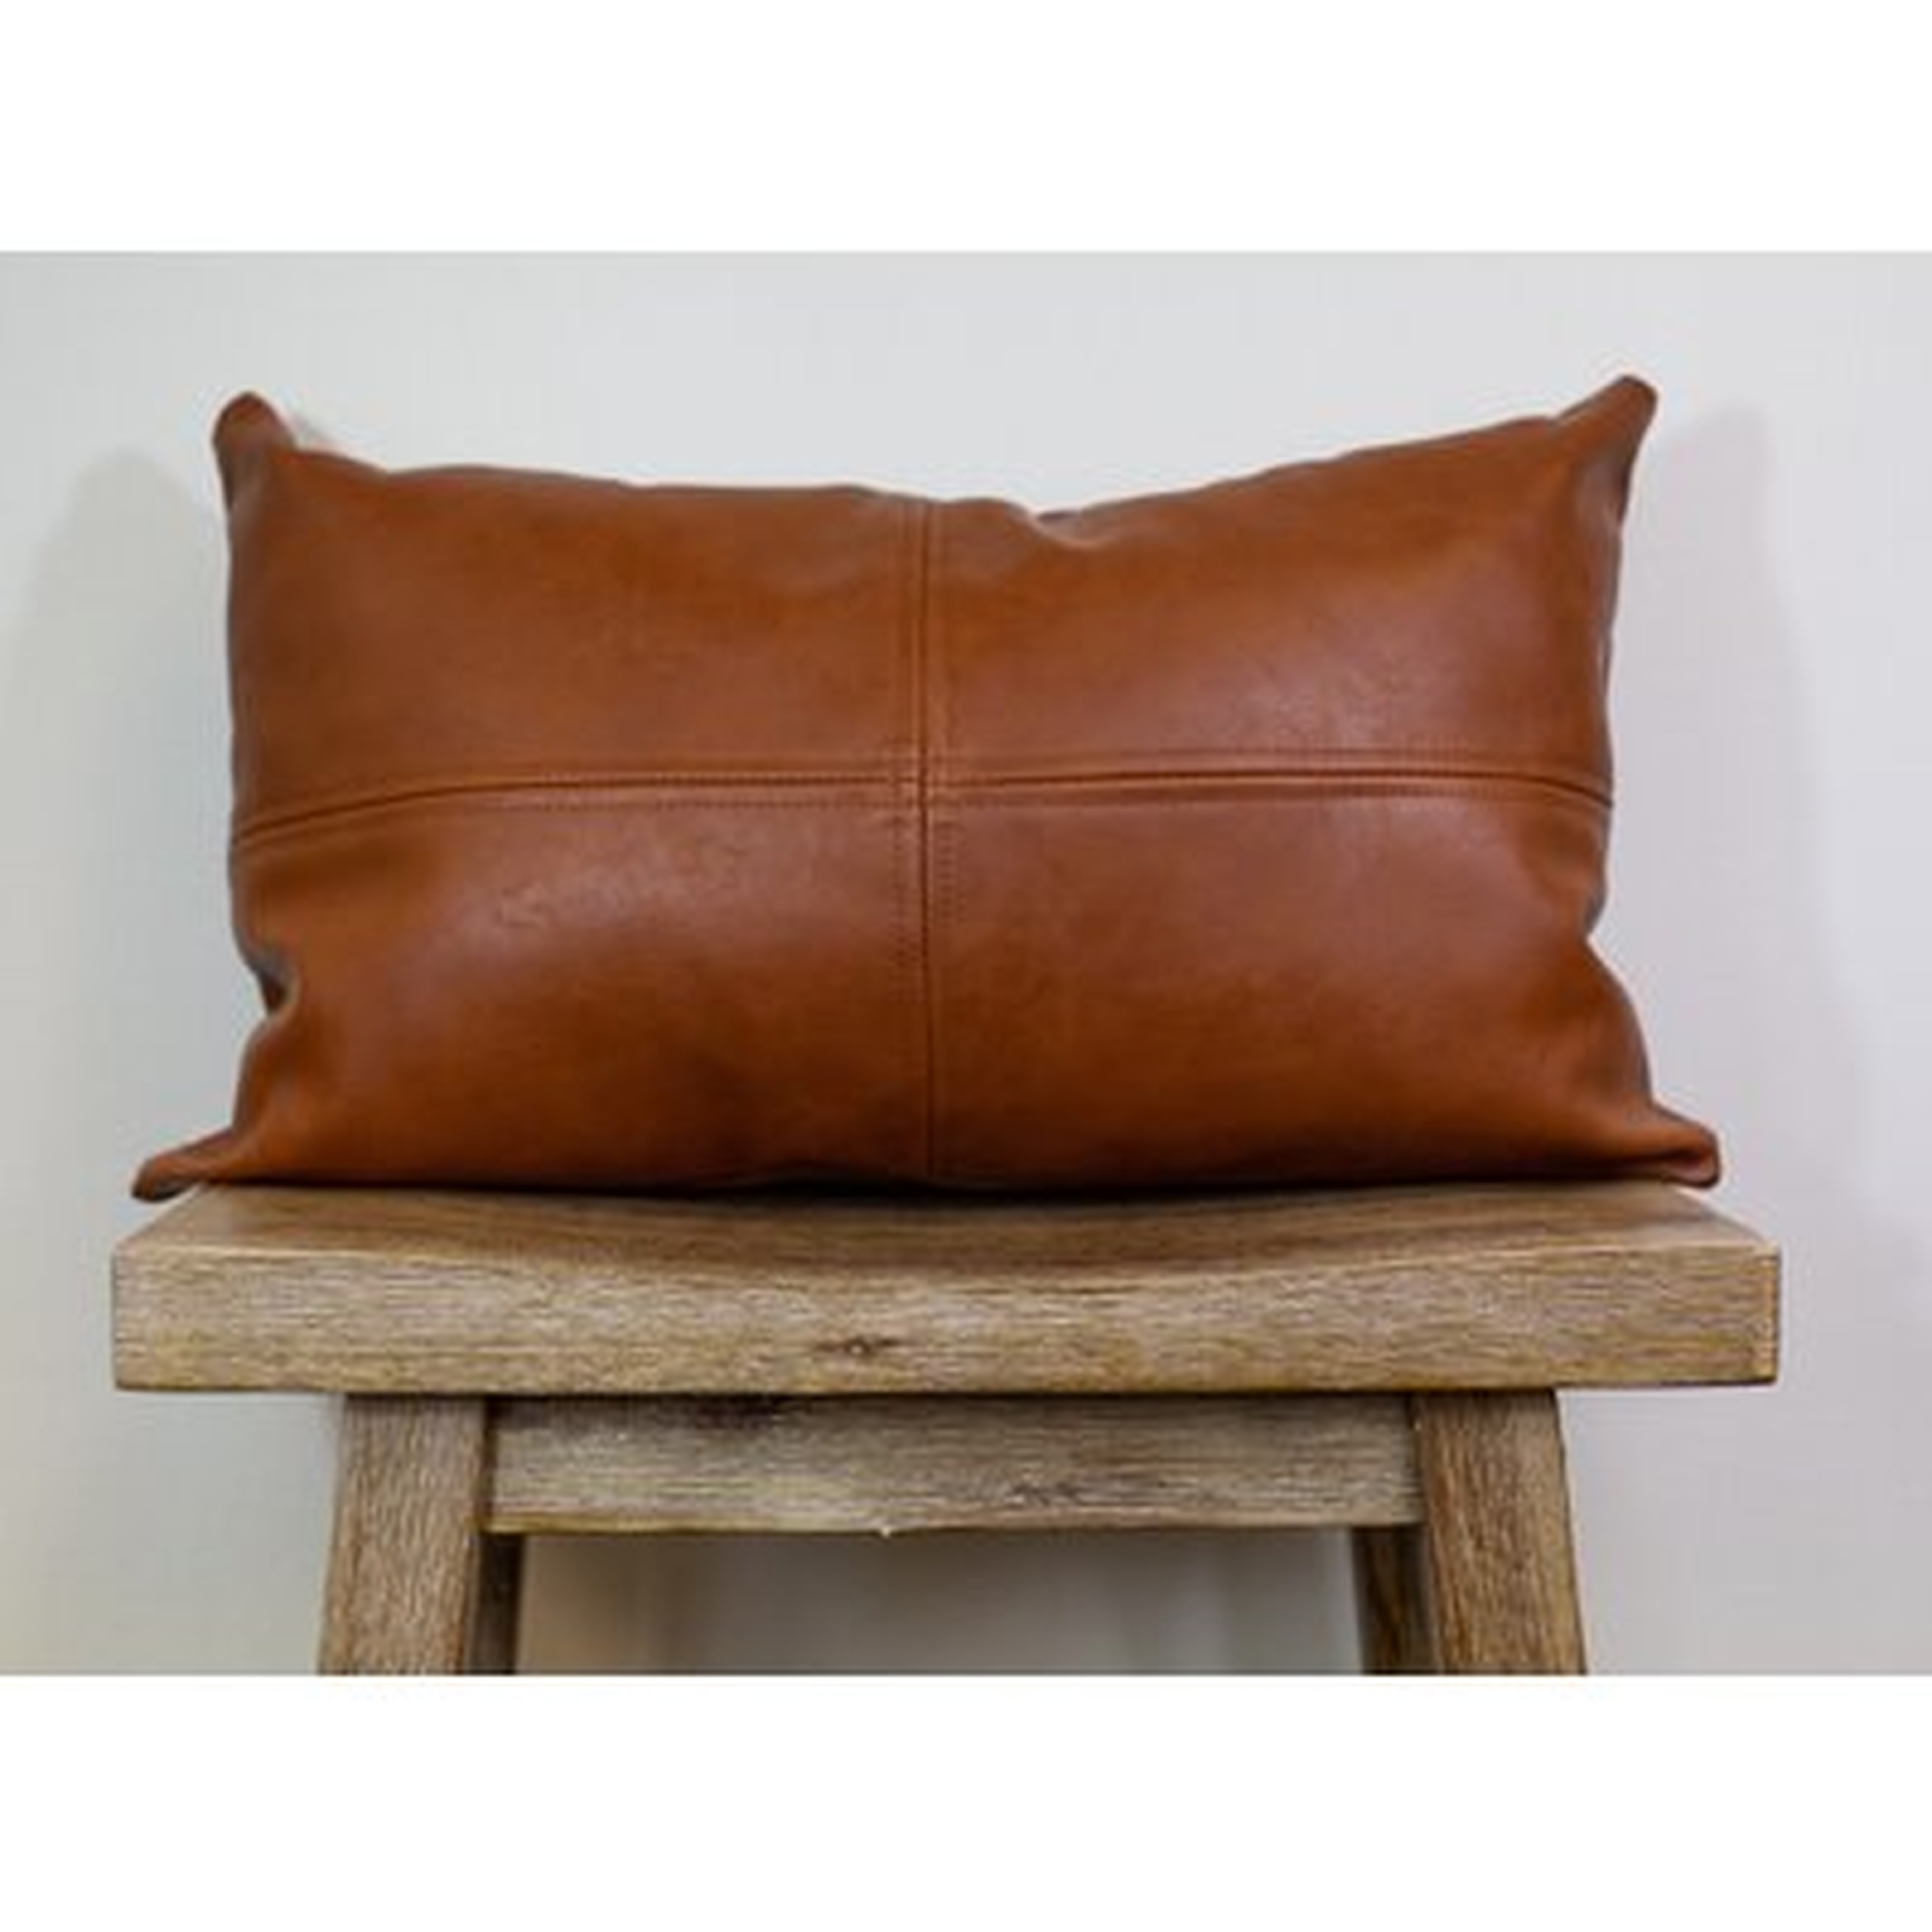 Faux Leather Pillow Cover/BB-39*Rectangle - Wayfair